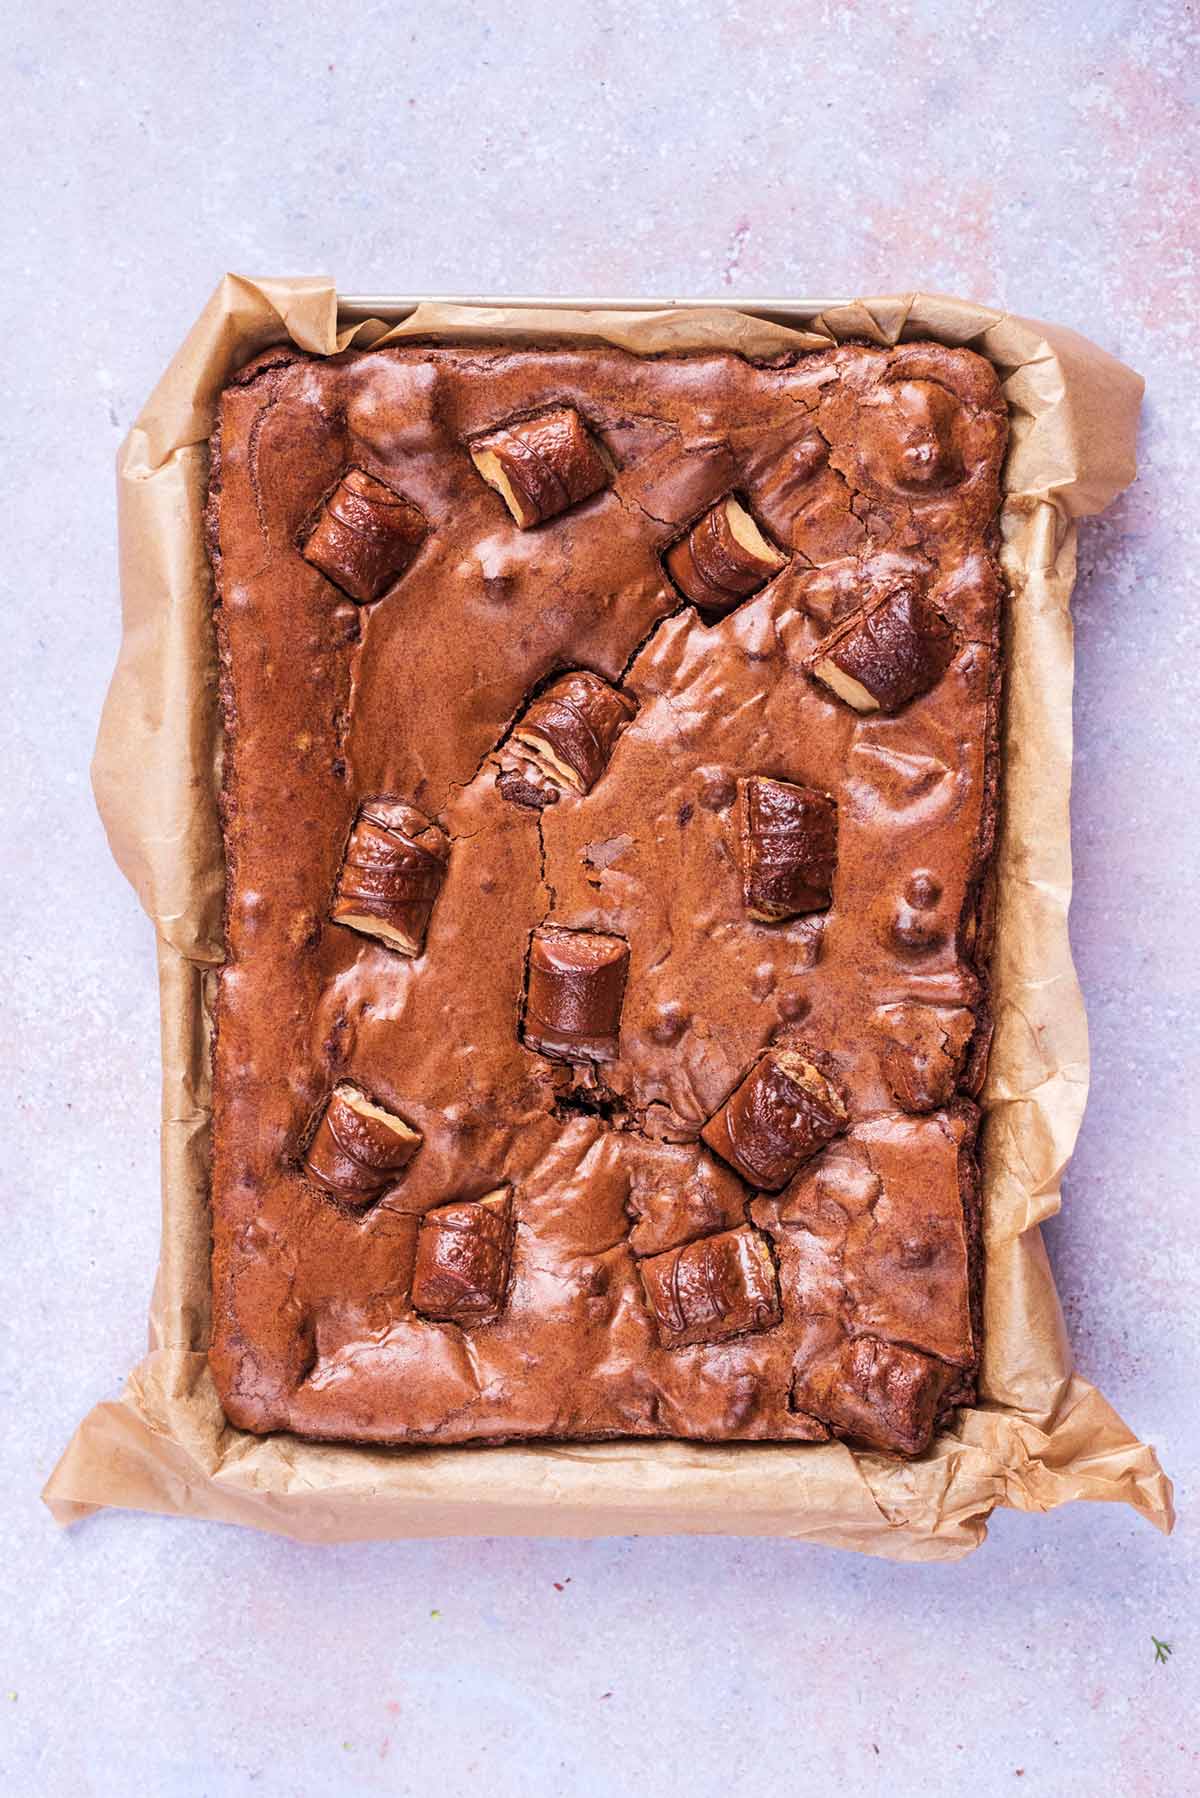 A slab of Kinder Bueno brownie in a tray.